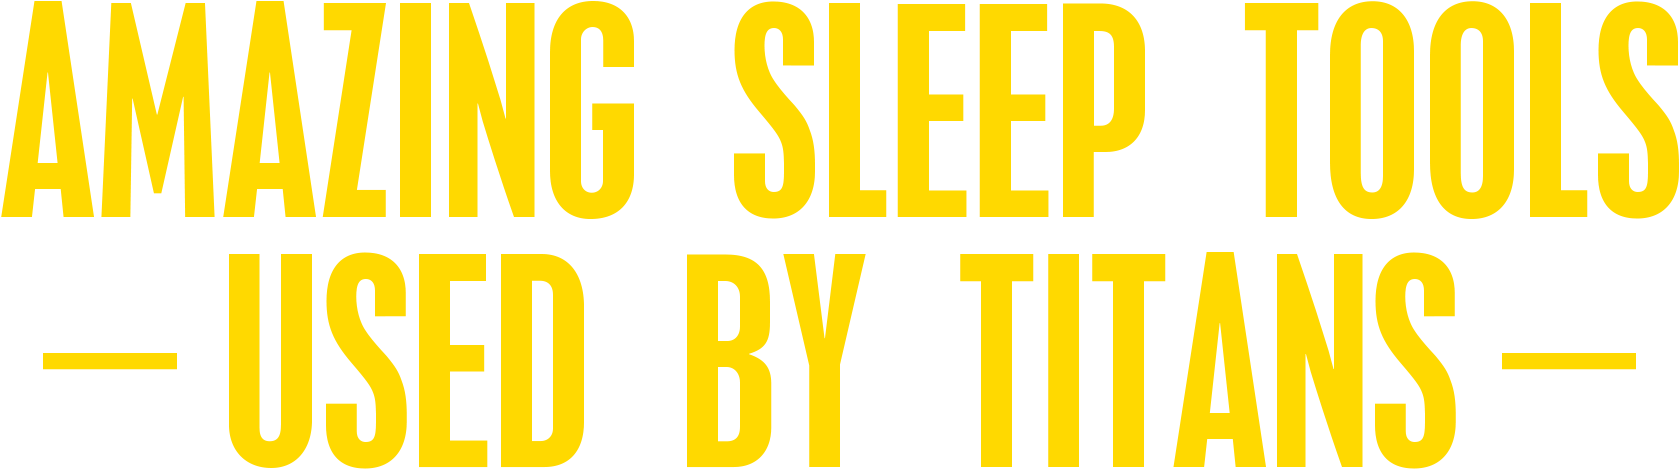 Amazing Sleep Tools Used By Titans - The Waking Mind Is The Least Serviceable In The Arts. (1800x629), Png Download